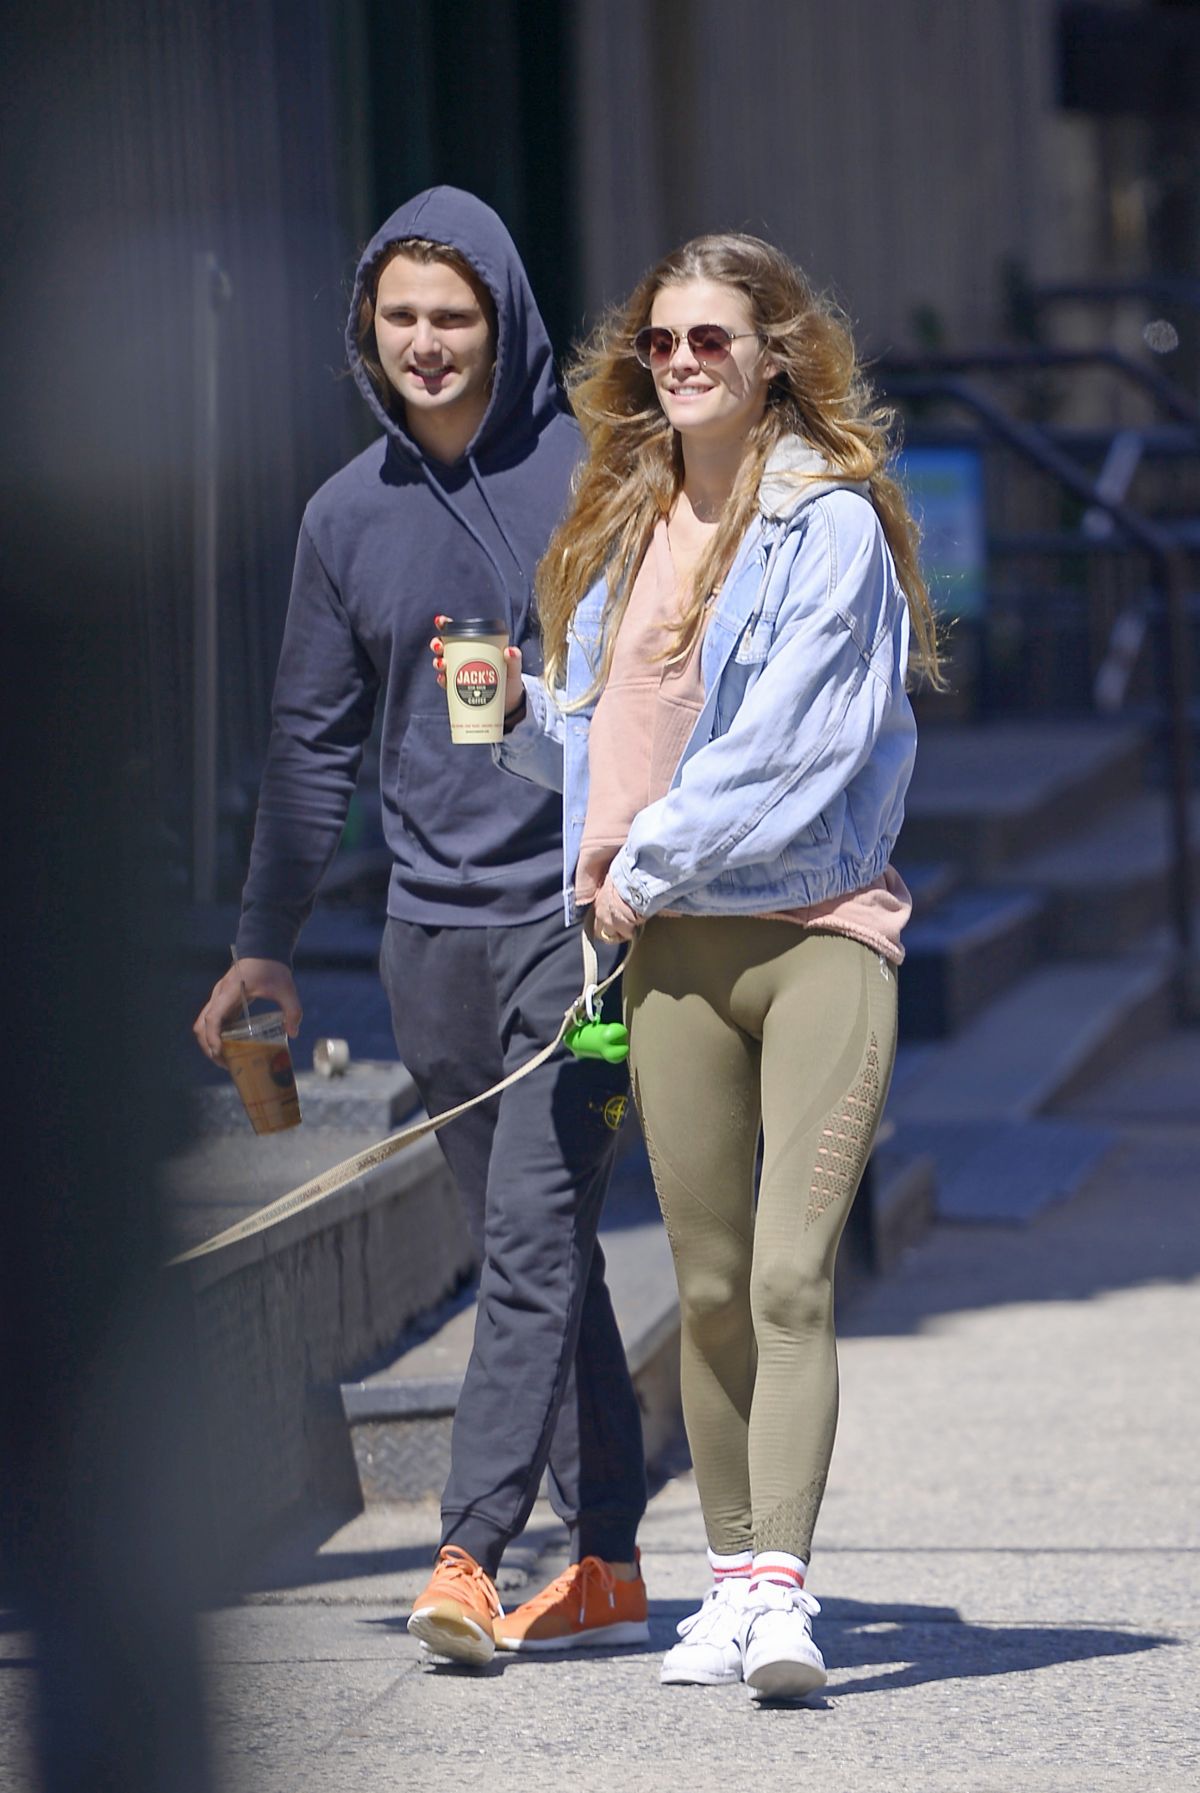 nina-agdal-and-jack-brinkley-with-their-dog-out-in-new-york-04-24-2019-3.jpg